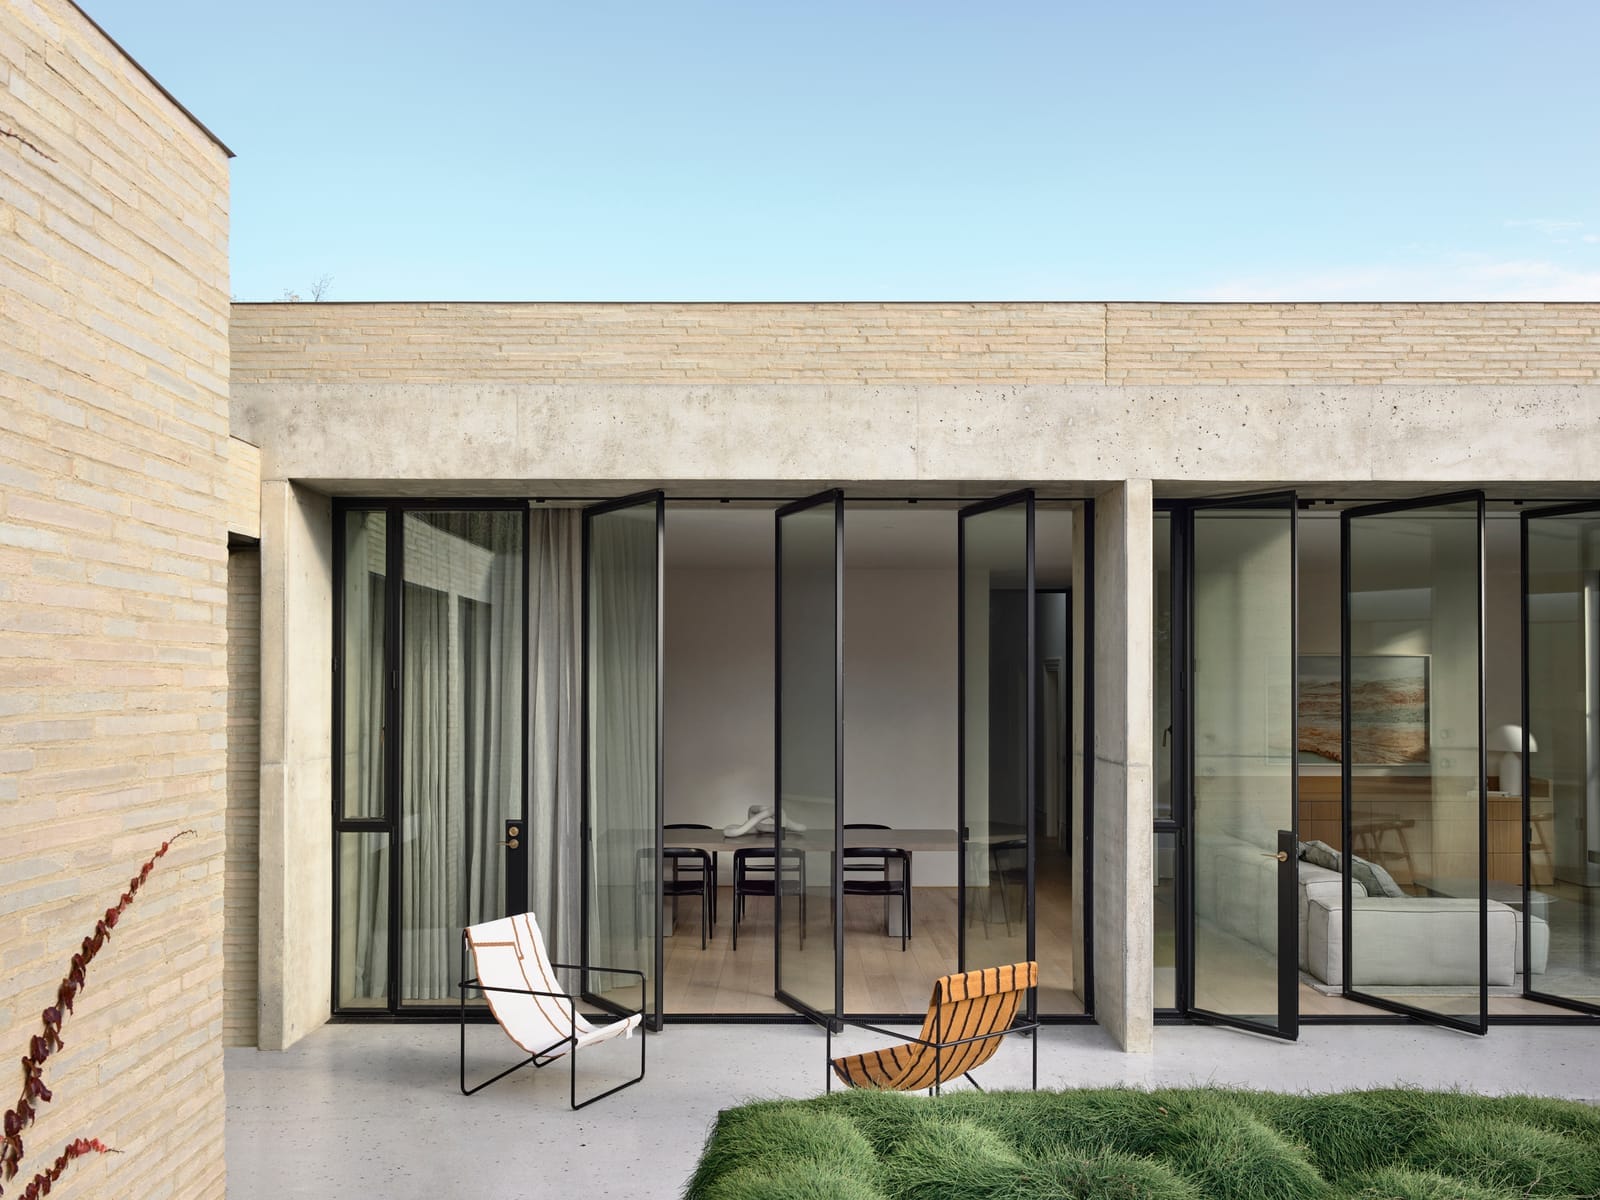 RE Residence by Inglis Architects.  modern residence with a clear sky above. The facade is minimalist with large glass doors and windows framed by stone walls. A single chair and a woven lounge chair are placed on the concrete patio.